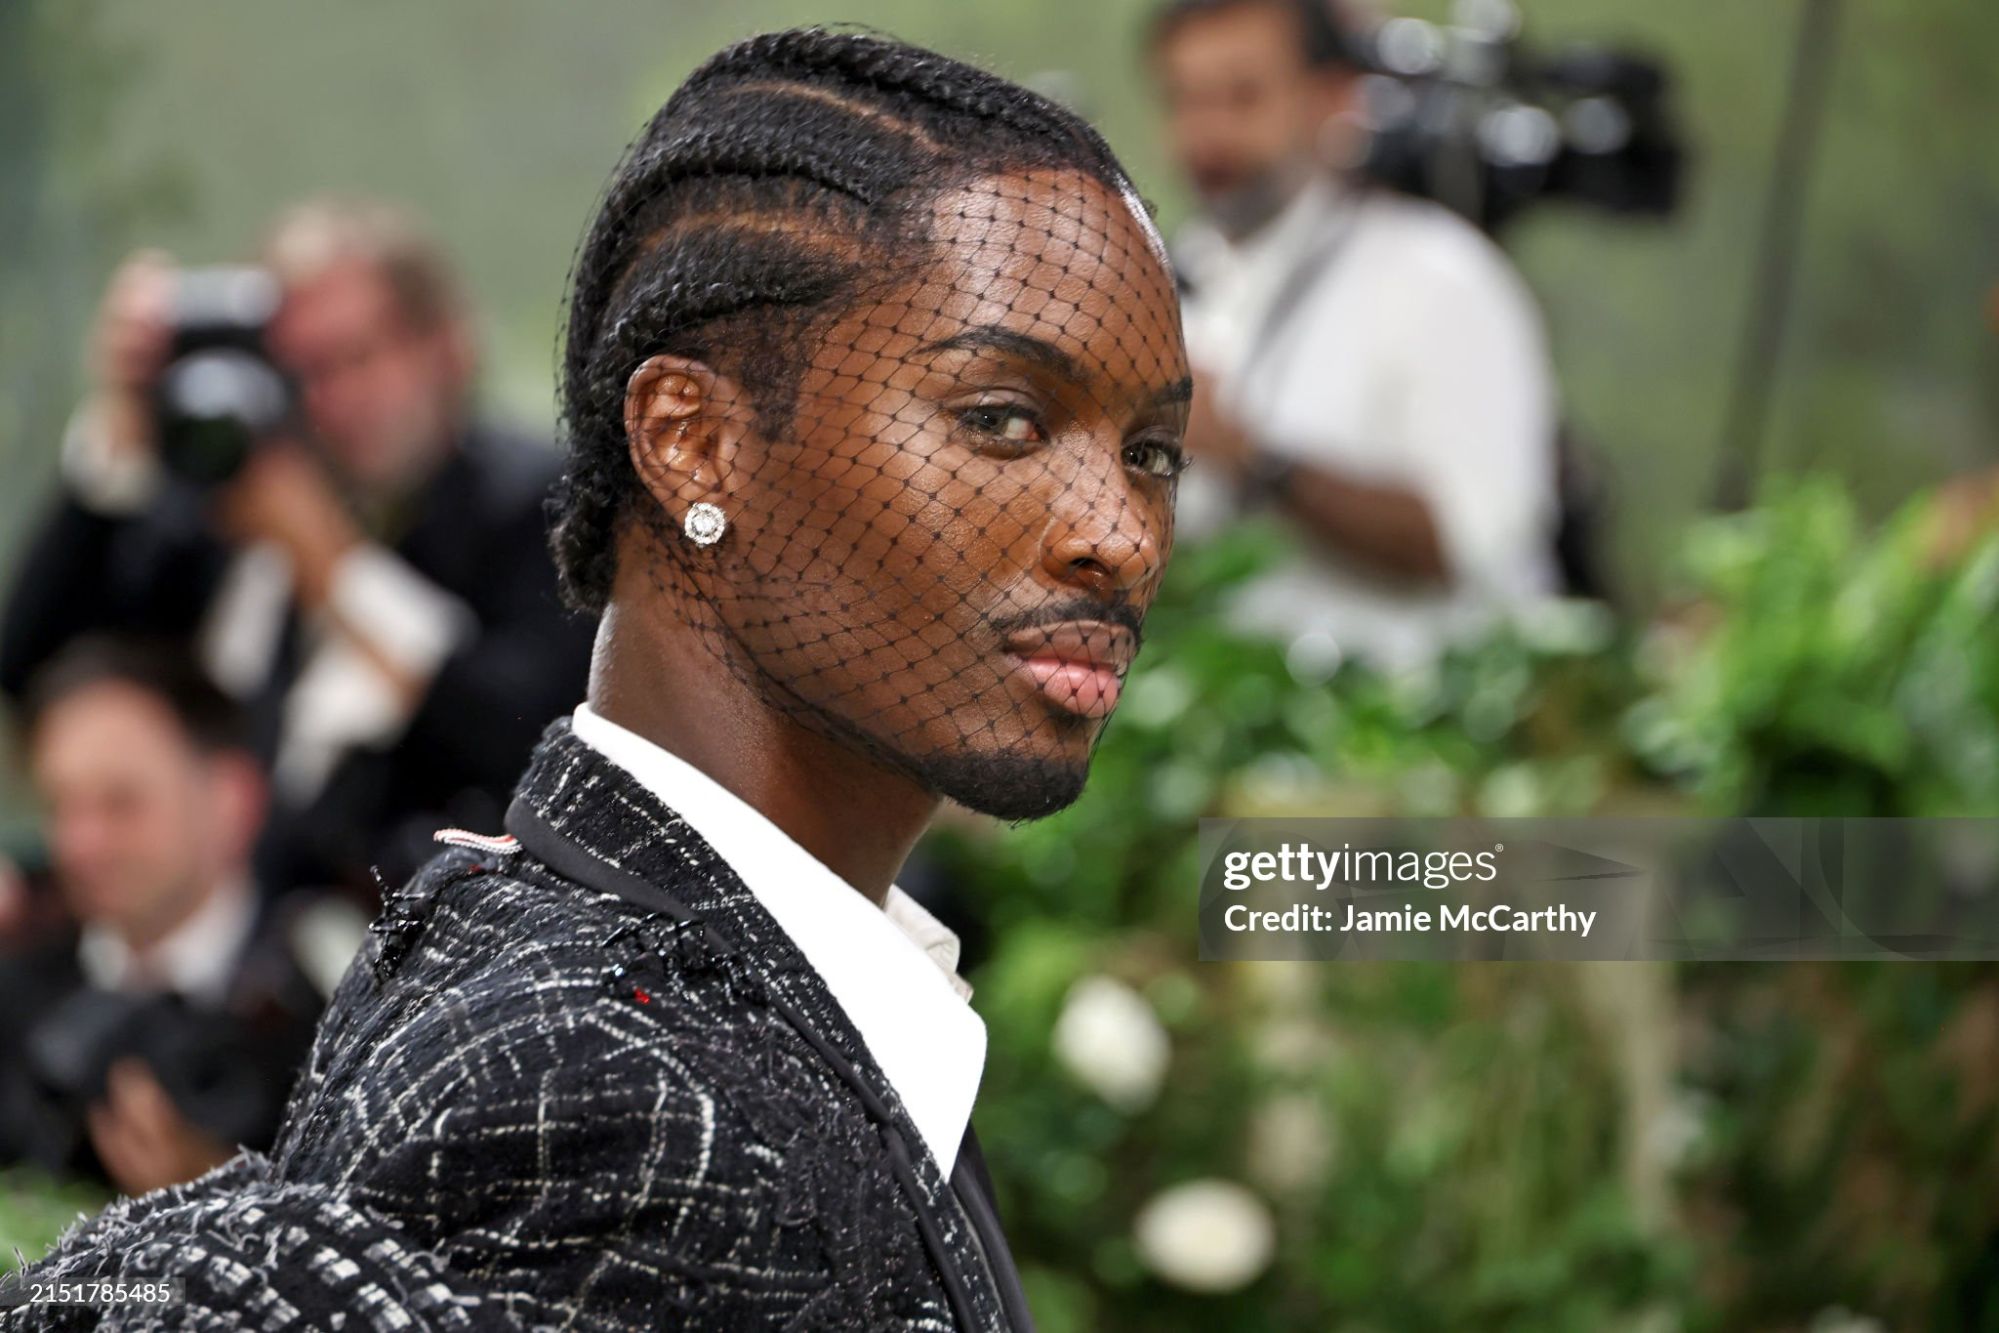 gettyimages-2151785485-2048x2048-1.jpg